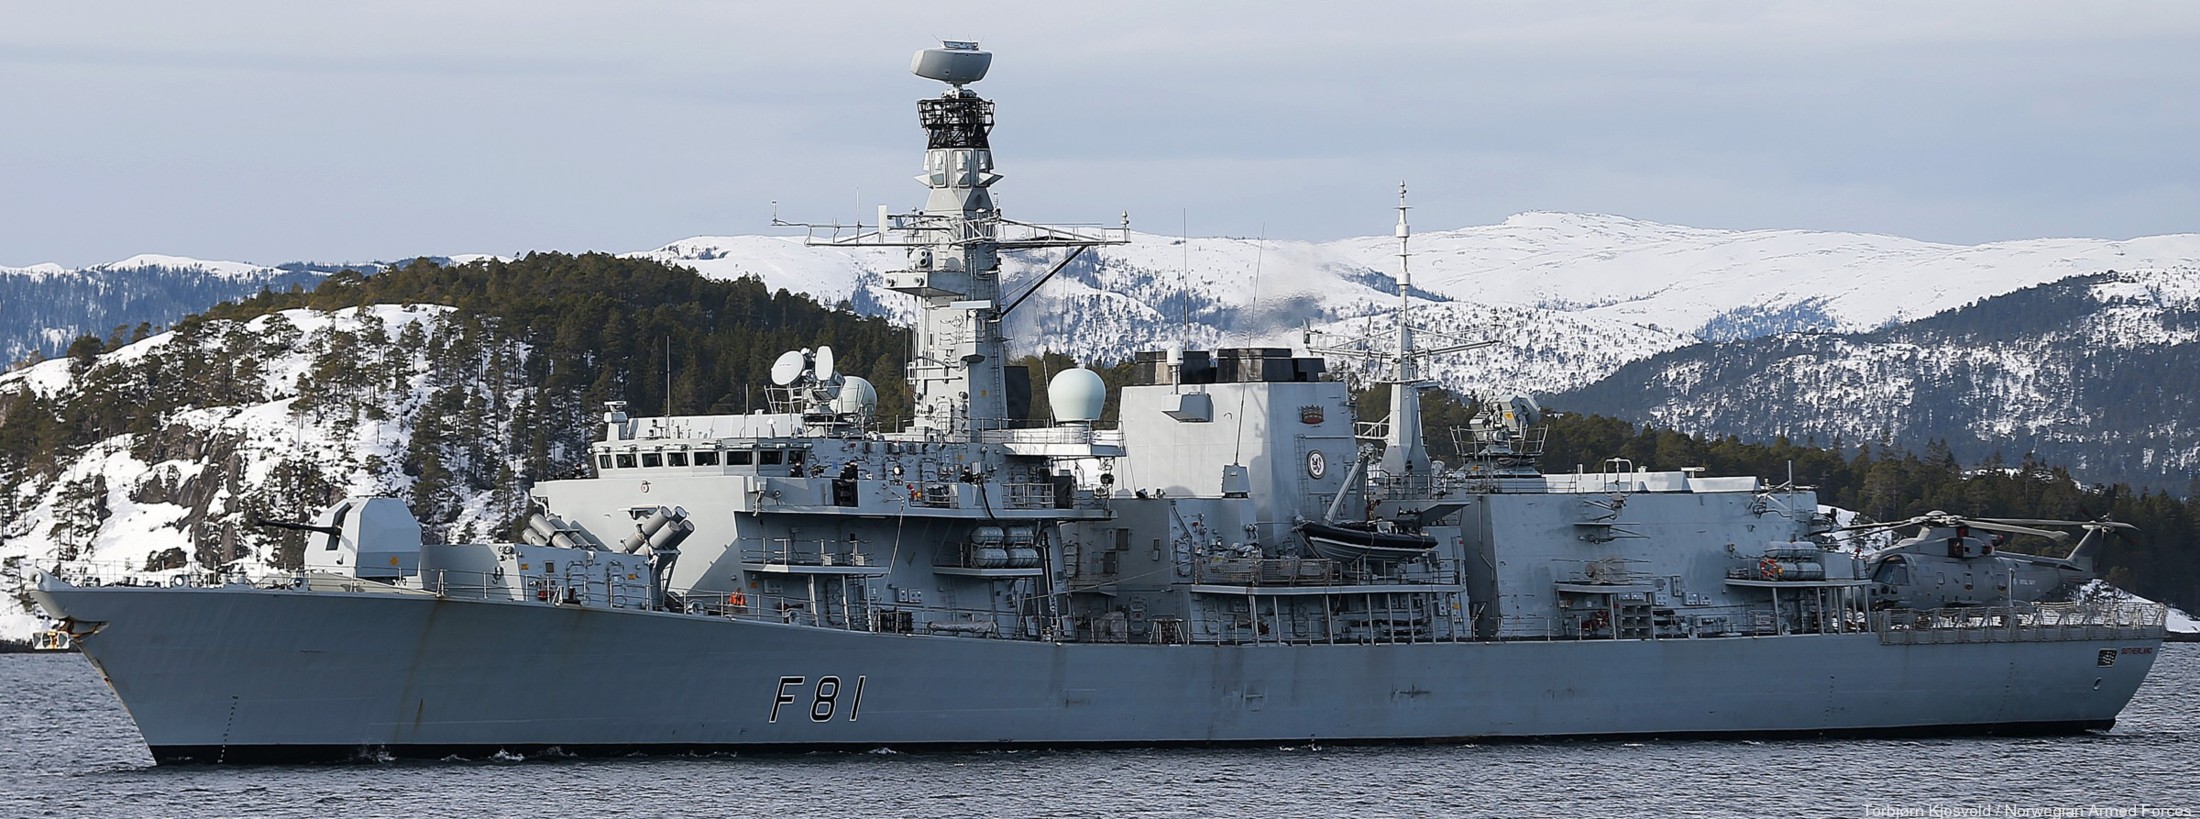 f-81 hms sutherland type 23 duke class guided missile frigate ffg royal navy nato norway 65